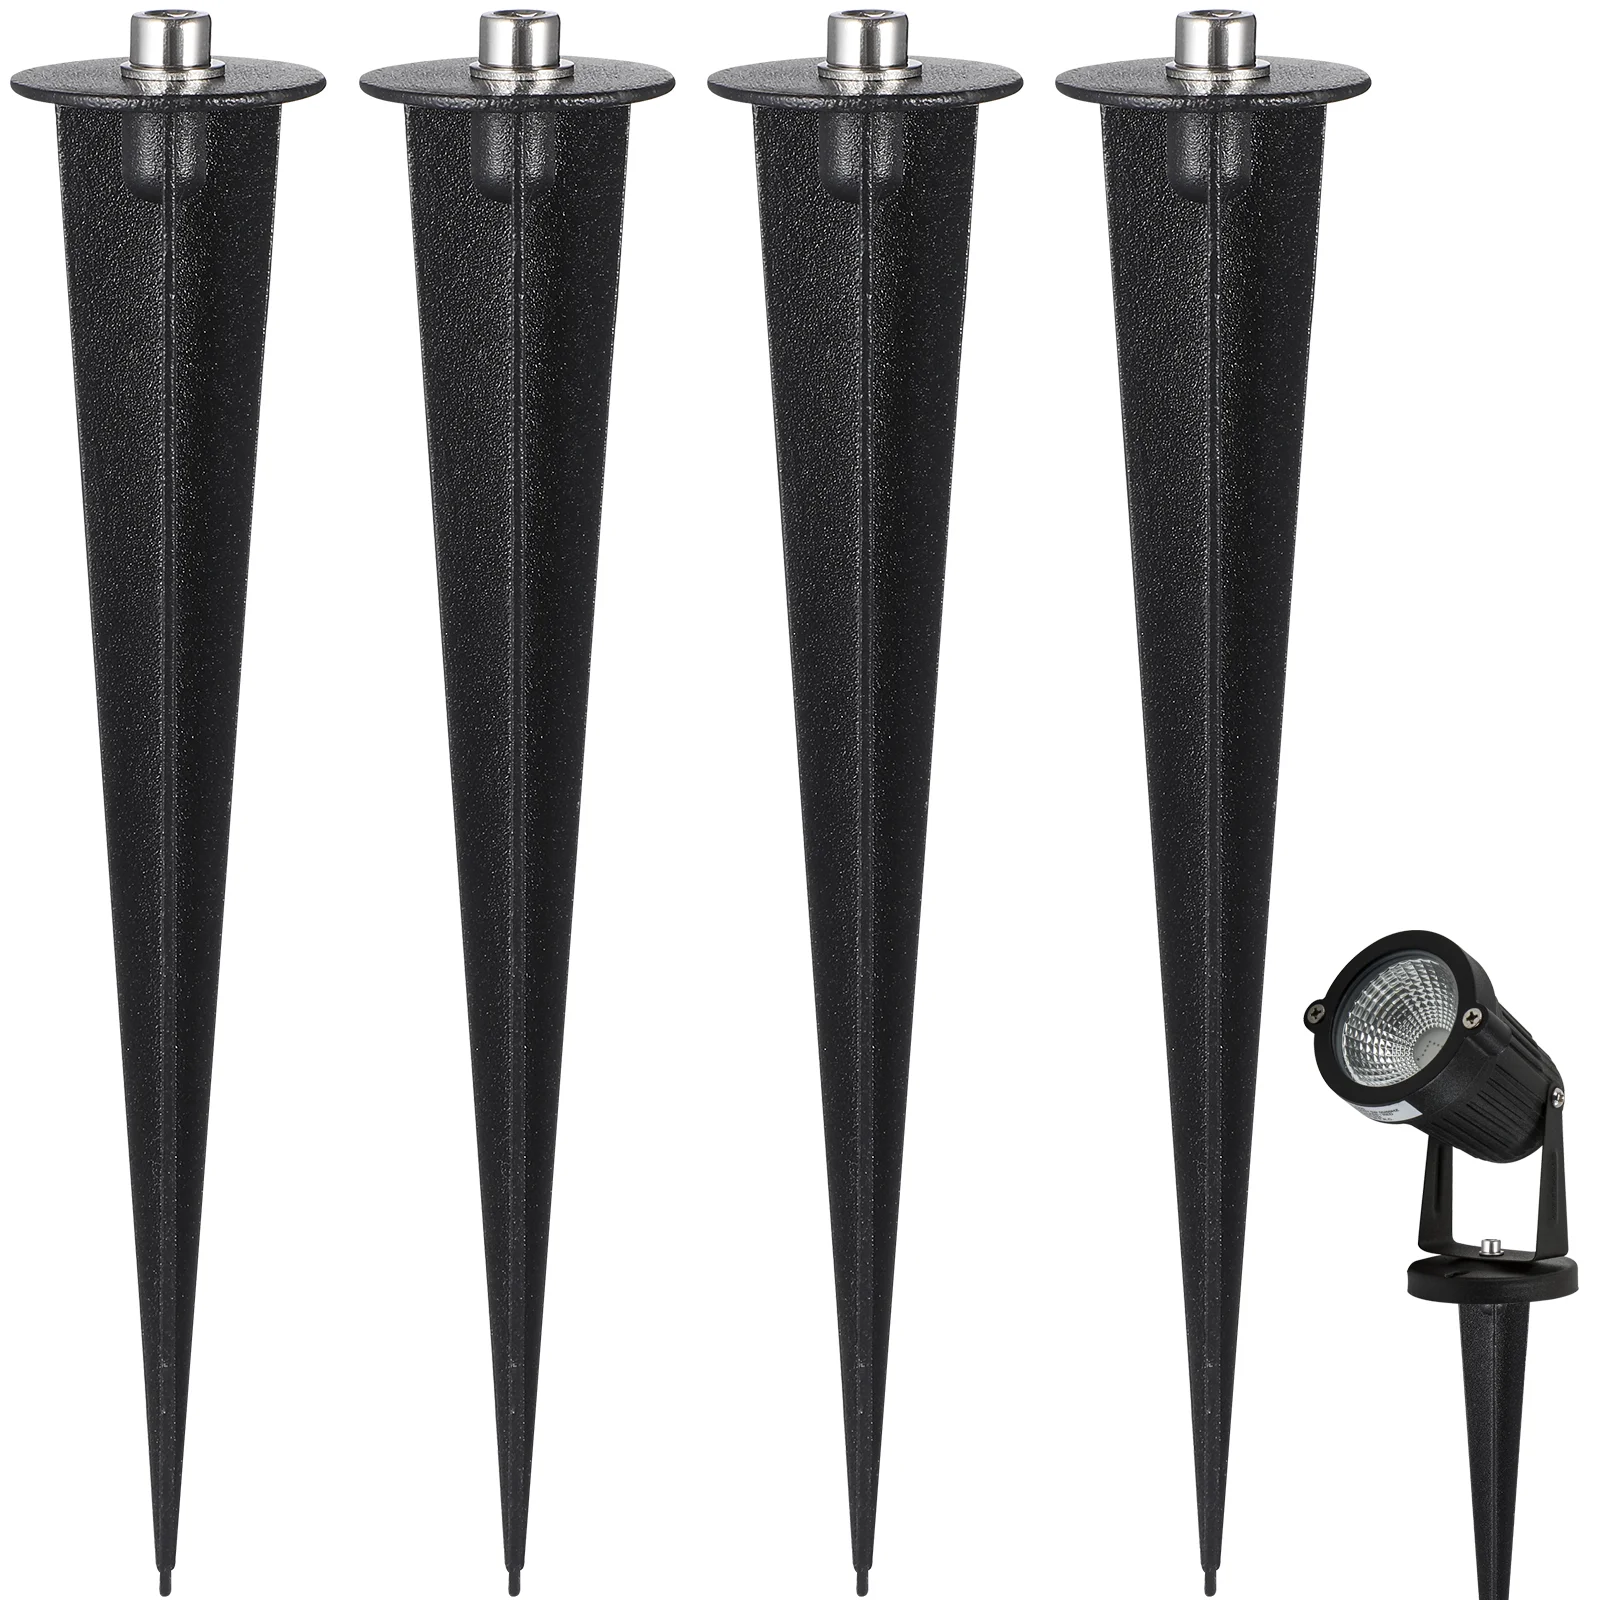 

Light Stake Spikes Lights Ground Spike Stake Garden Lamp Spike Flood Lamps Lighting Pathway Bracket For Outdoor Yard